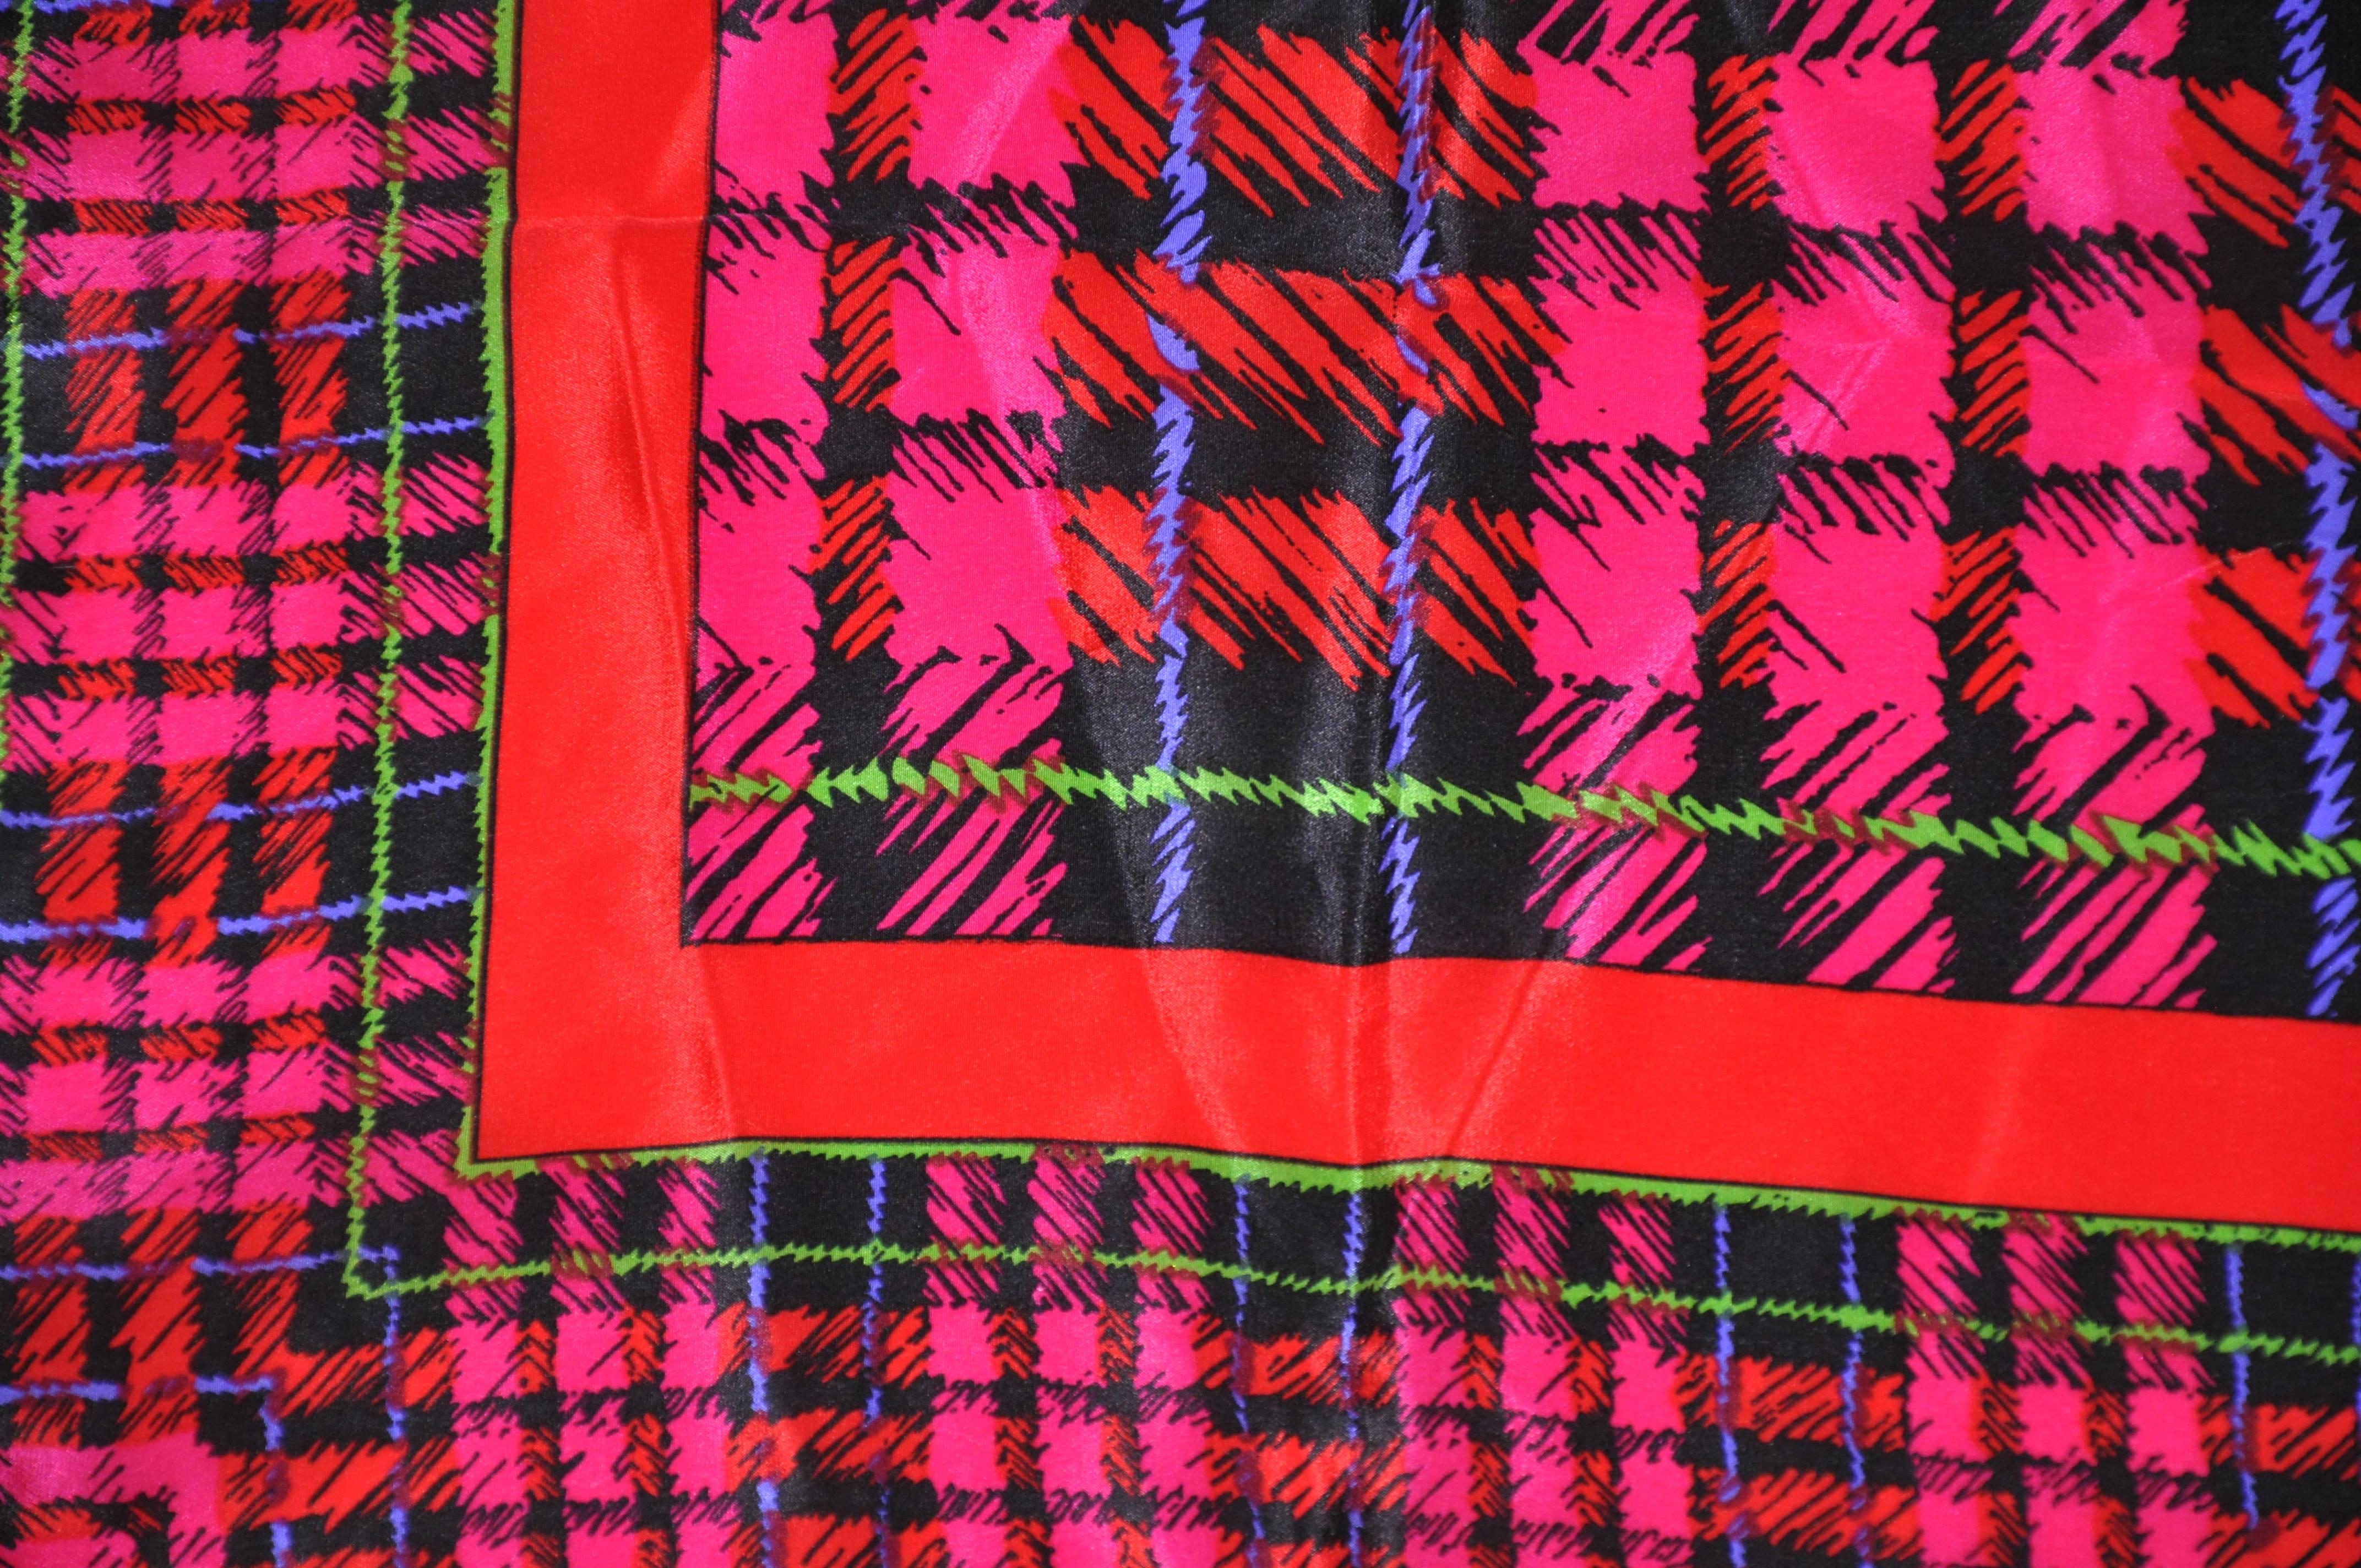   Vivid fuchsia with green & plum accent plaid silk scarf measures 31" x 31" and finished with rolled edges. Made in Italy.